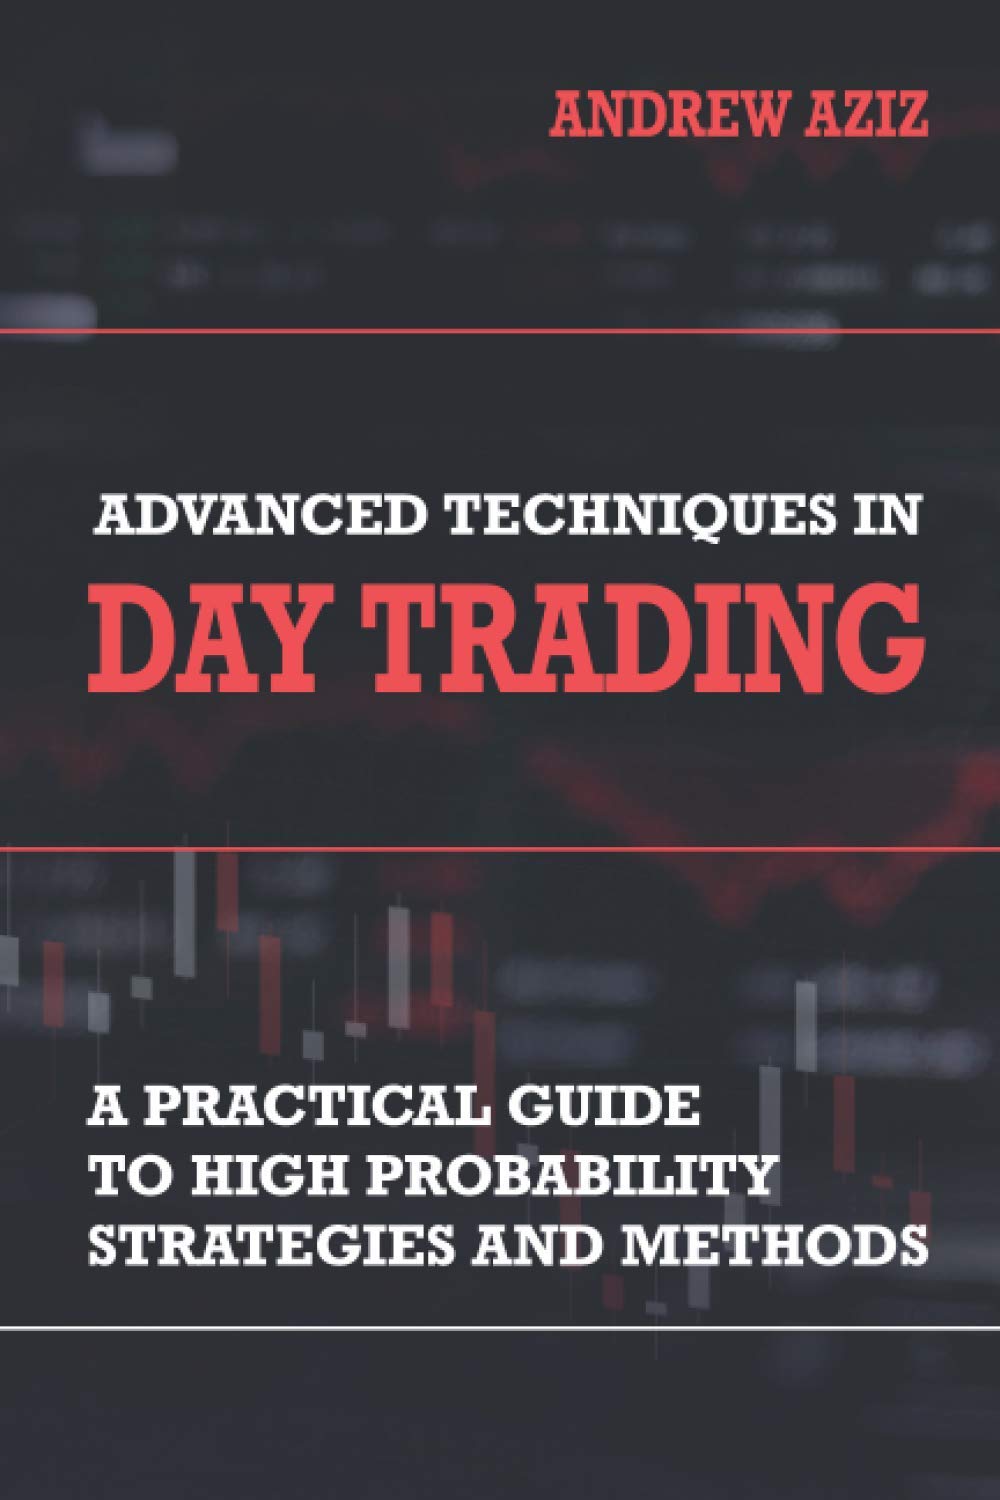 Advanced Techniques in Day Trading: A Practical Guide to High Probability Day Trading Strategies and Methods